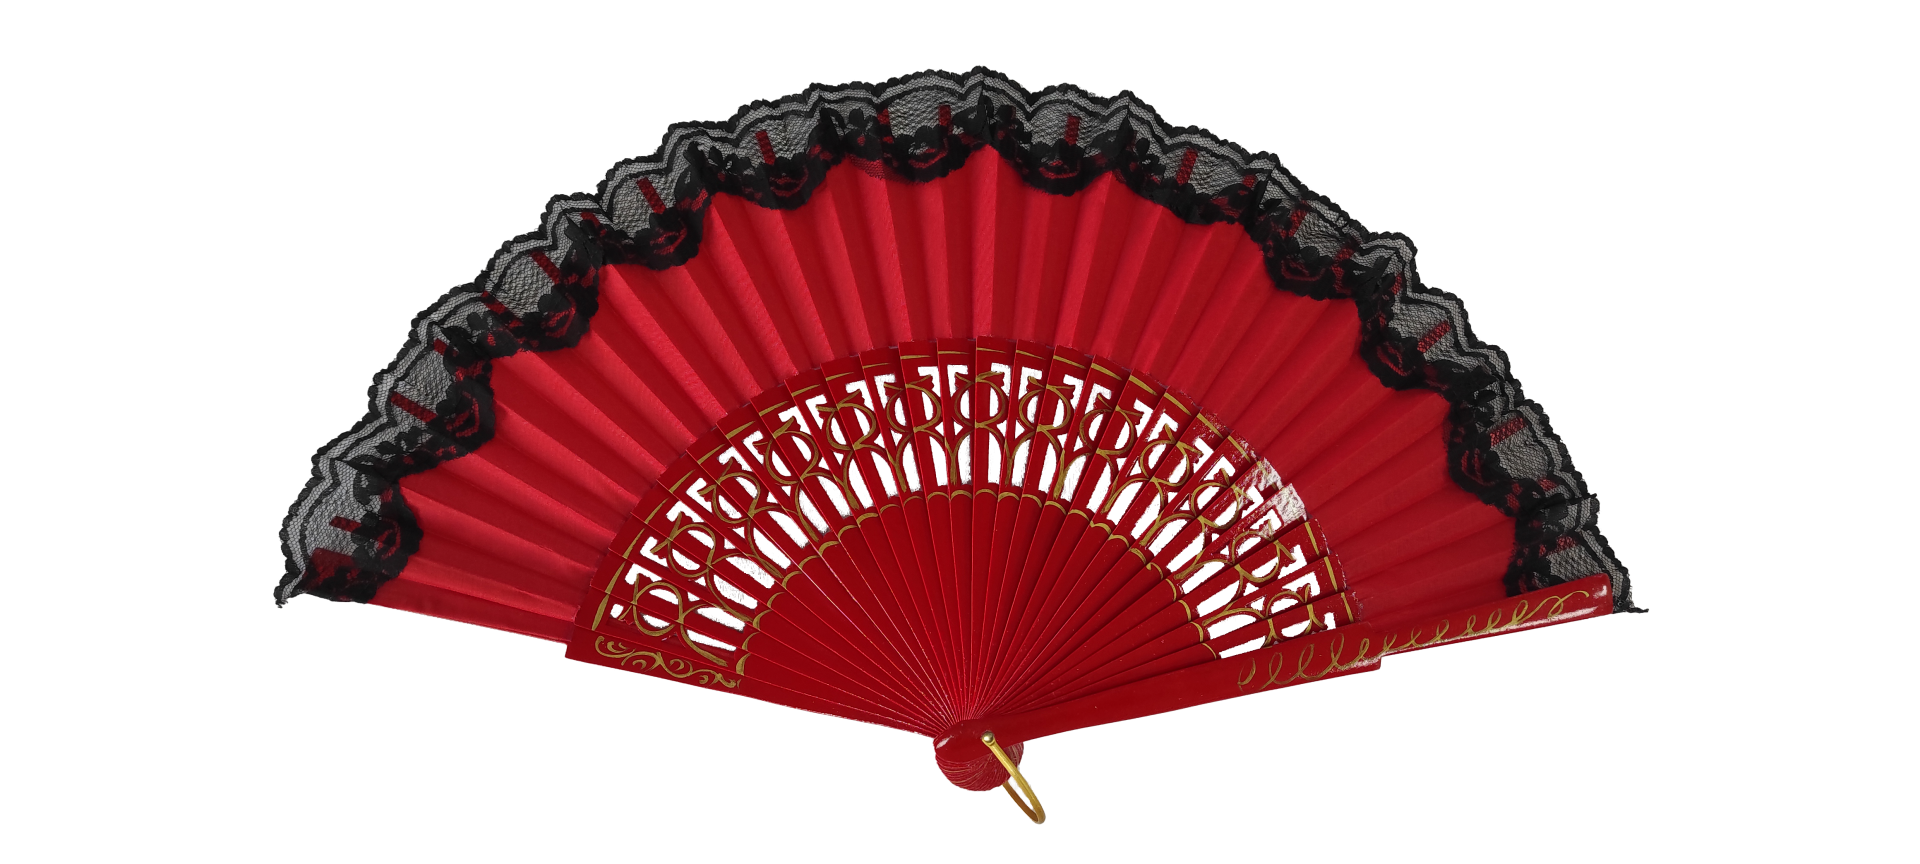 6314/11/11 RJ - RJ -  Wooden fan with lace (red)